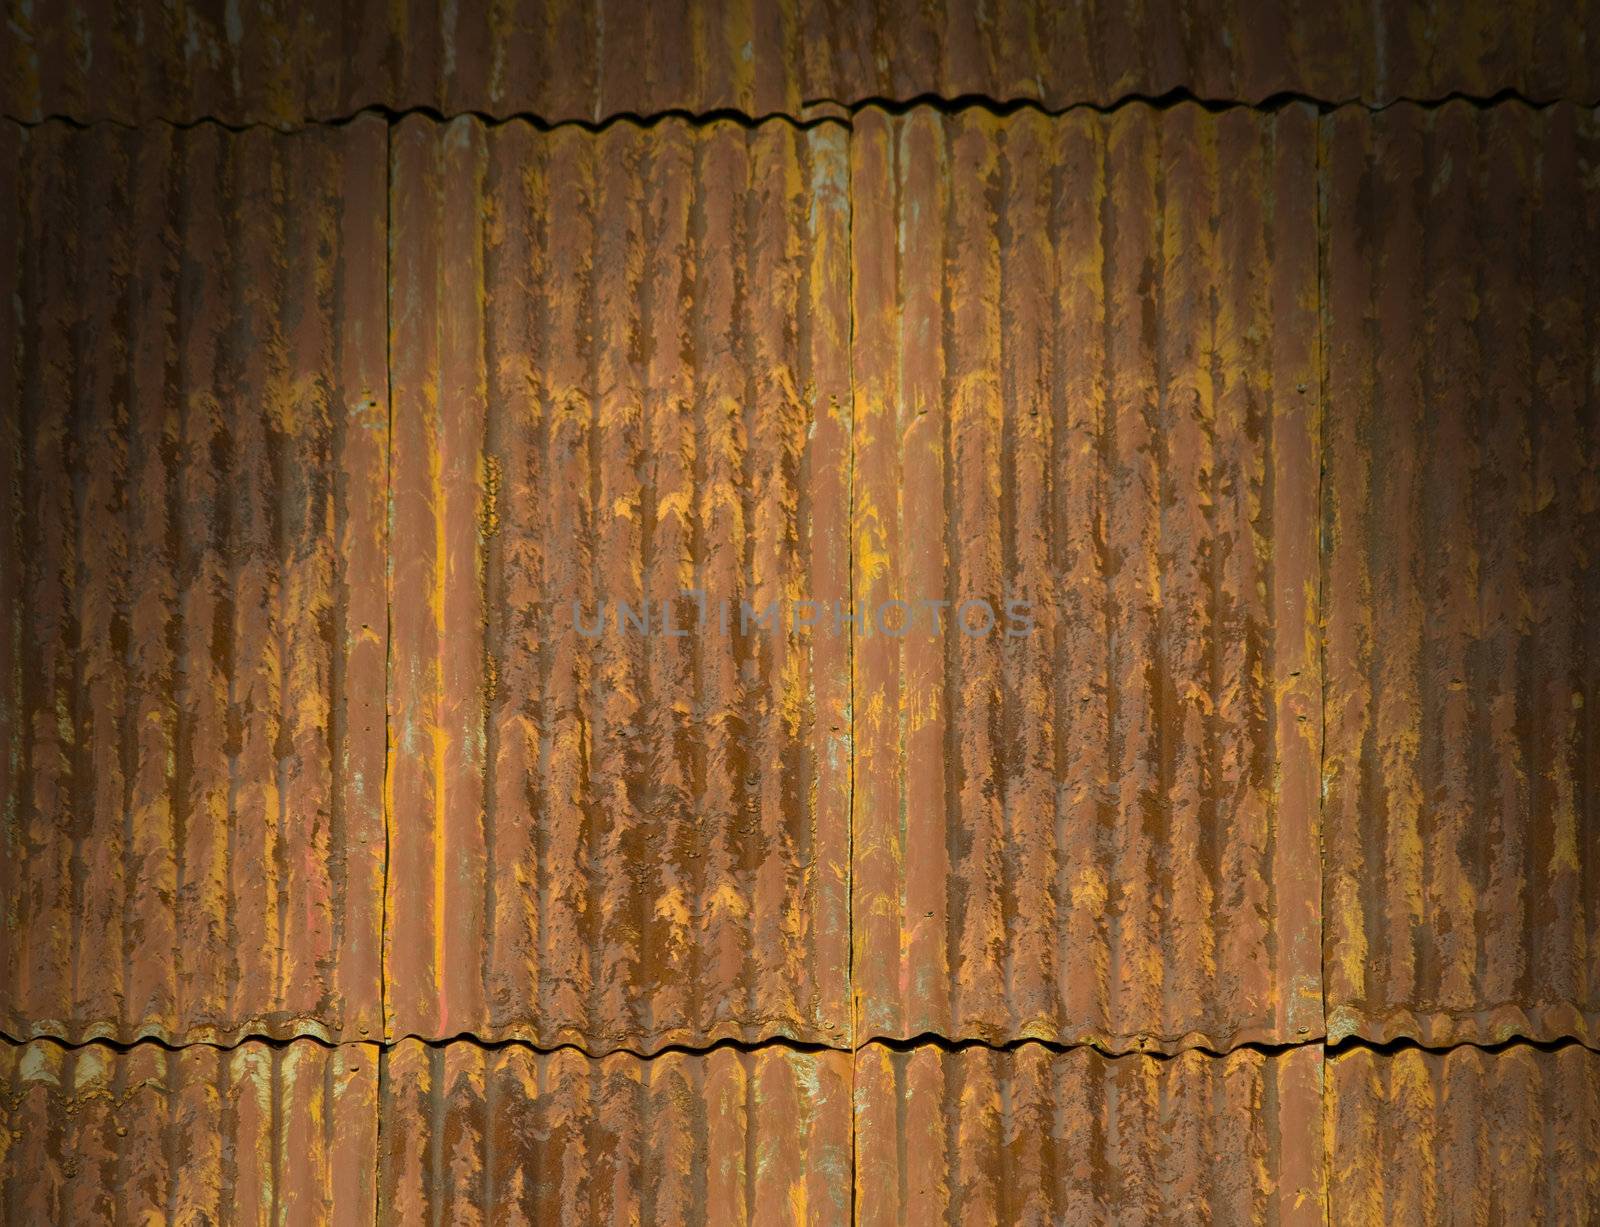 Corroded and rusty corrugated metal roof panels lit dramatically